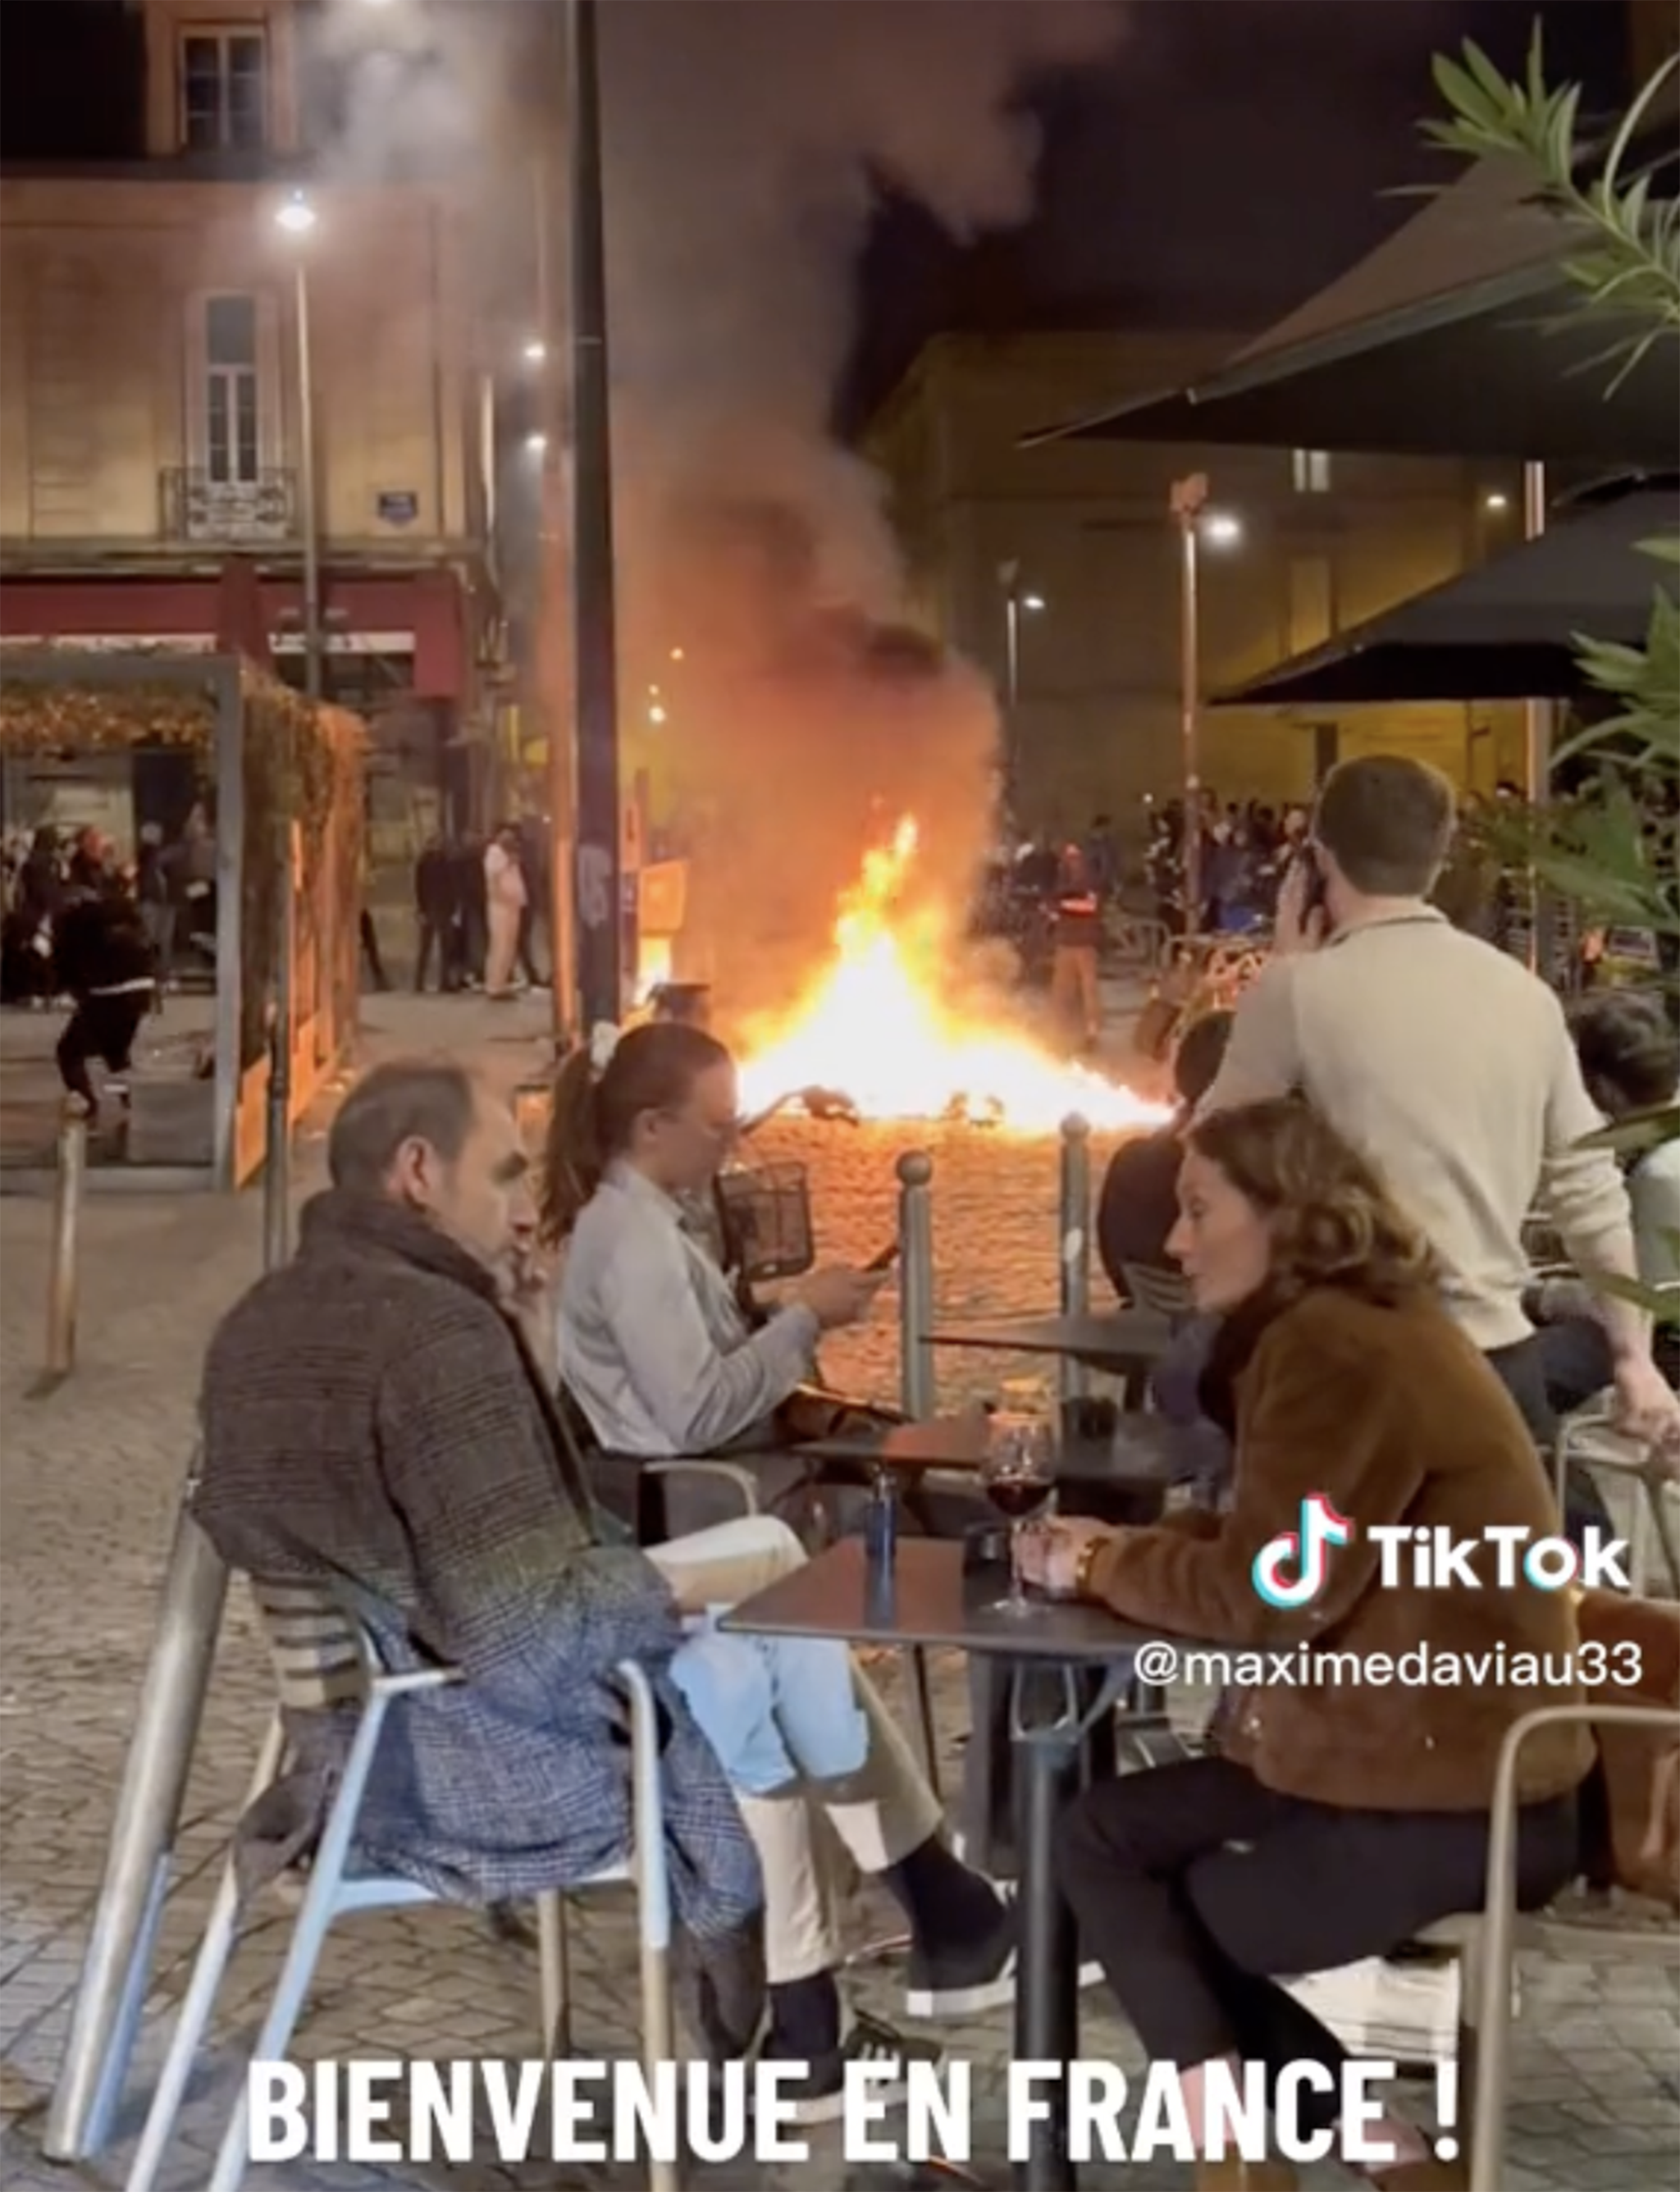 Diners at Place de la Victoire, in the southern wine-growing region of Bordeaux on Thursday, appeared unphased as they sat near the flames